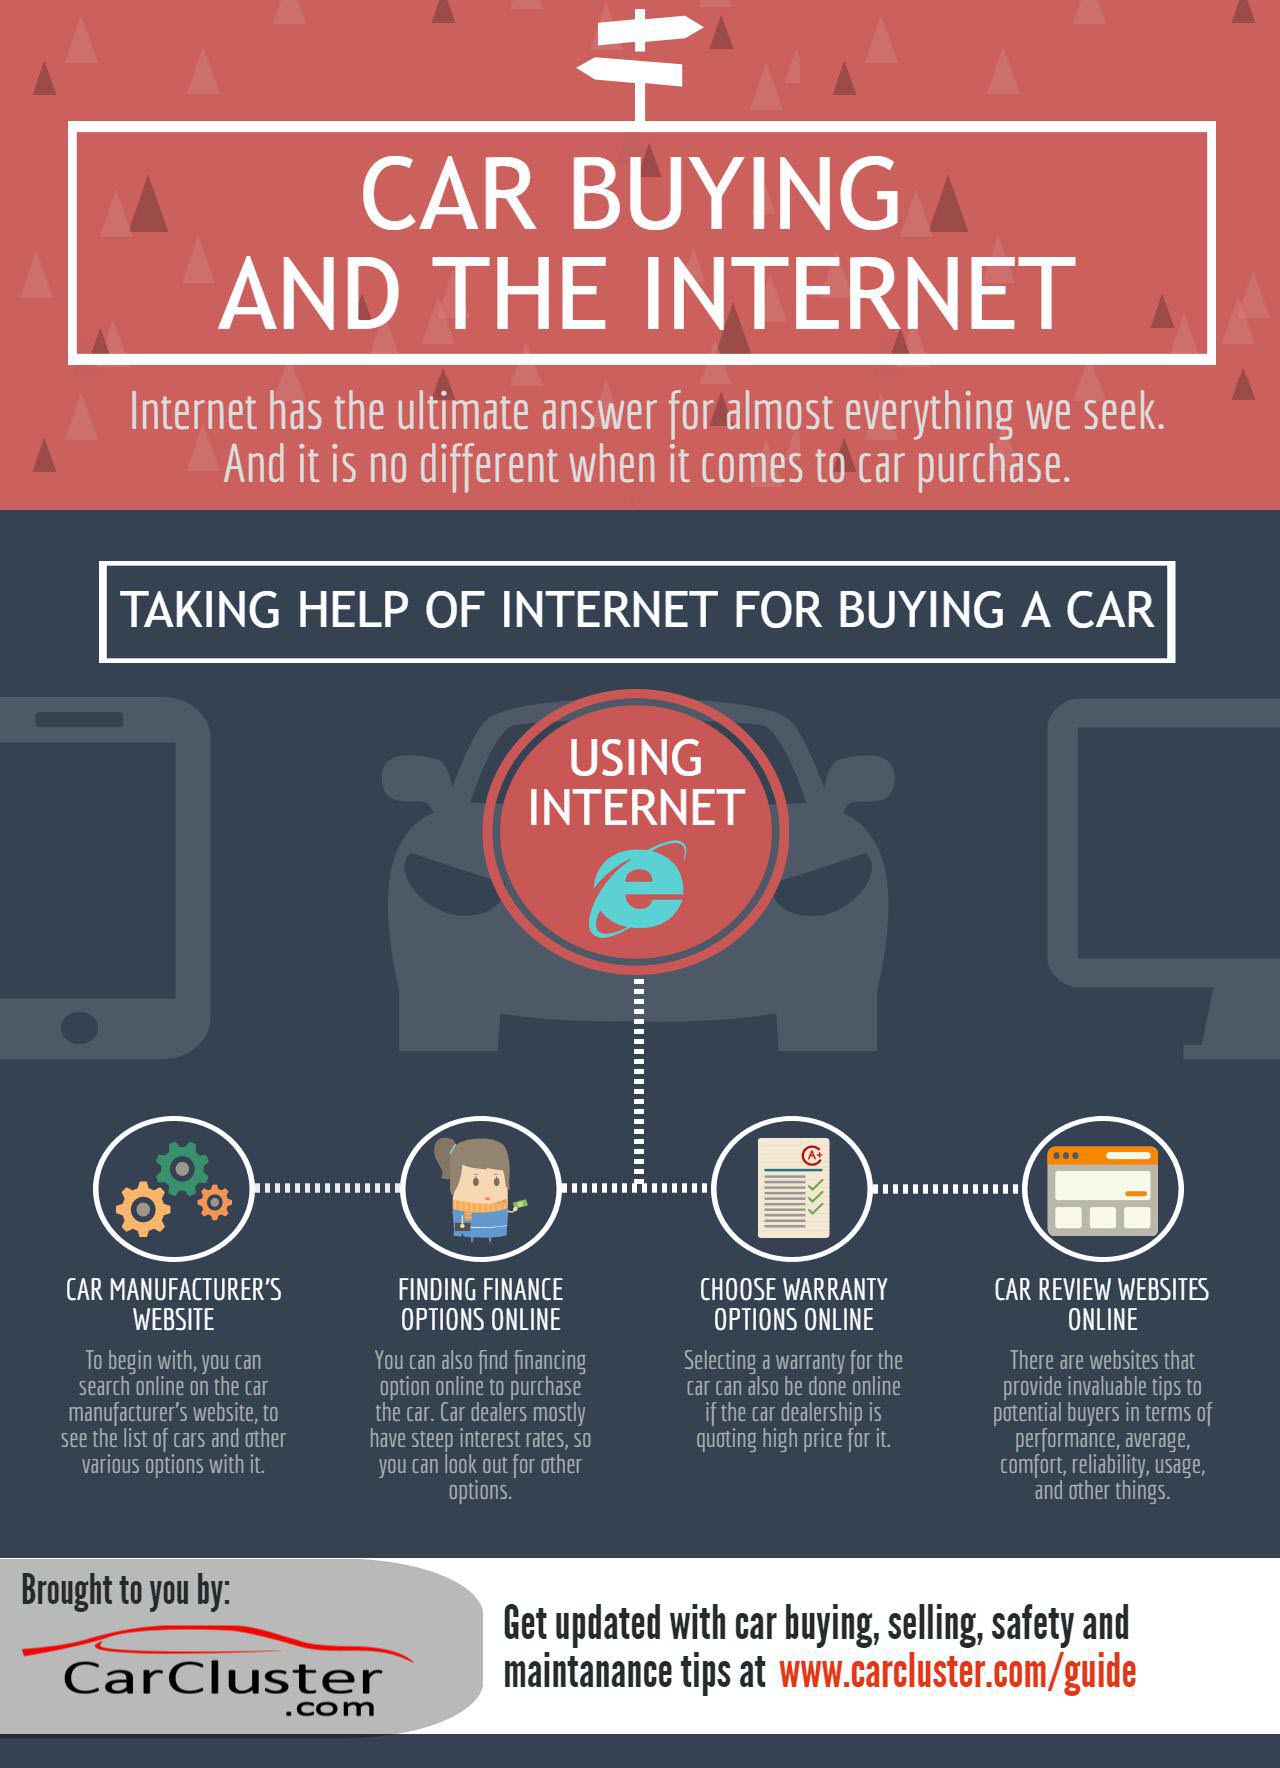 Car Buying and the Internet